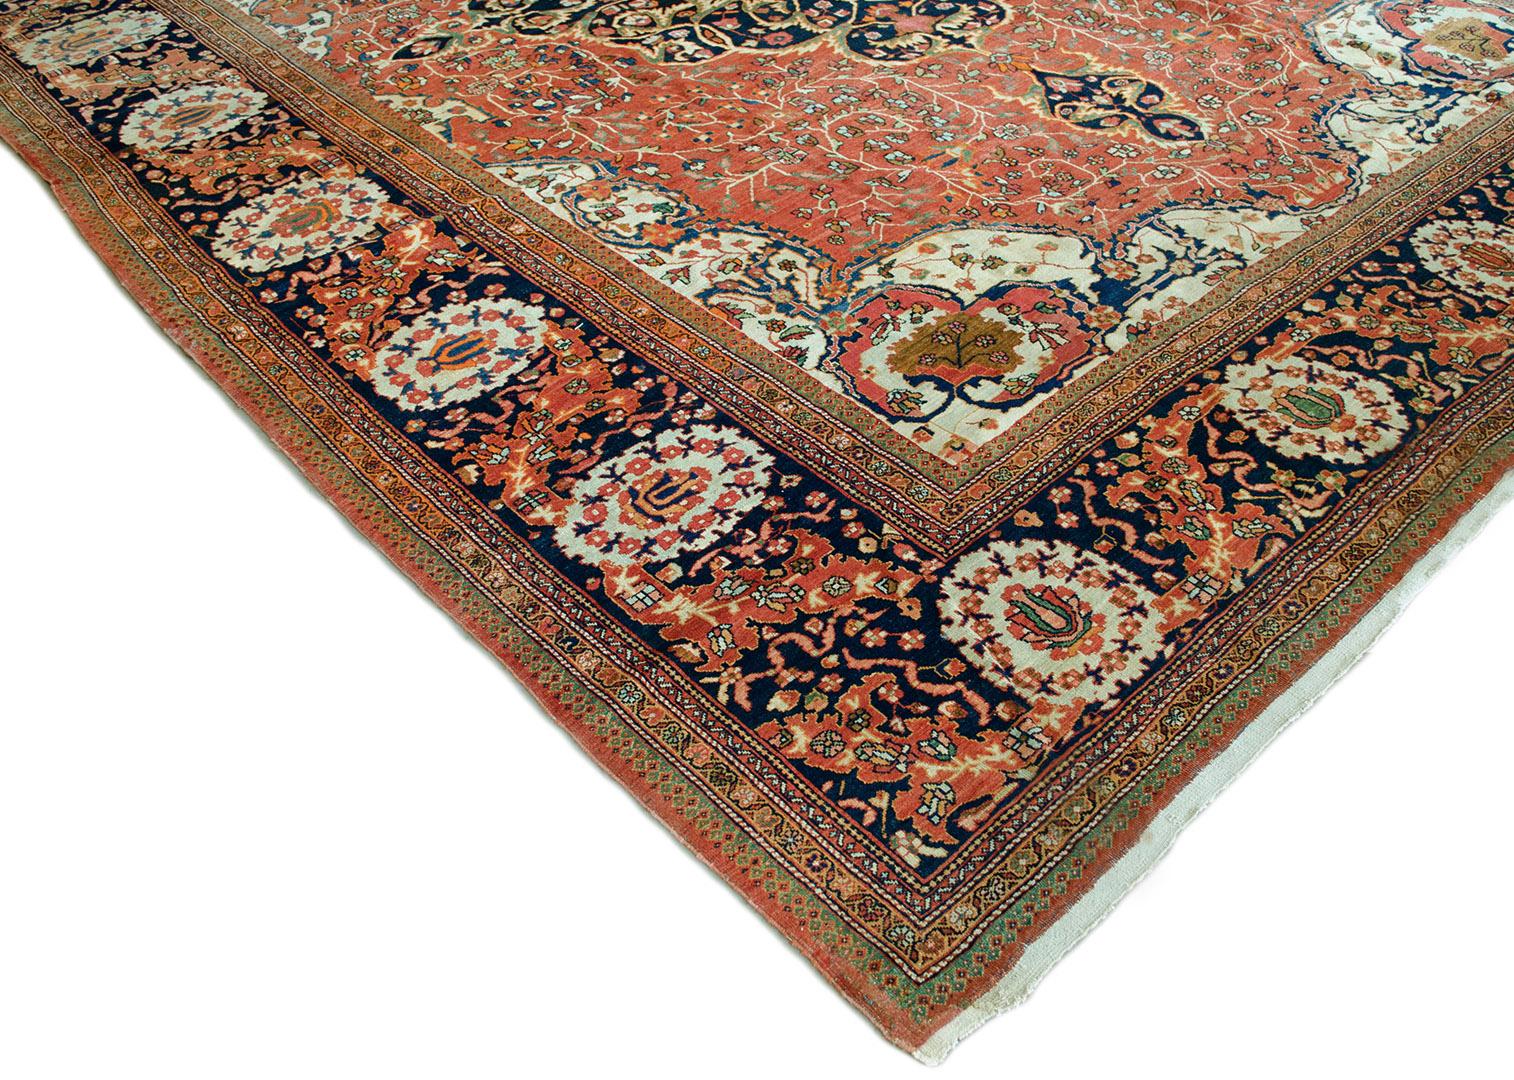 This traditional handwoven Persian Fereghan rug has an extremely fine brick-red field of sparse polychrome floral motifs enclosing a deep indigo and ivory double clasped lozenge medallion, containing a profusion of serrated arabesque ivory-pistachio